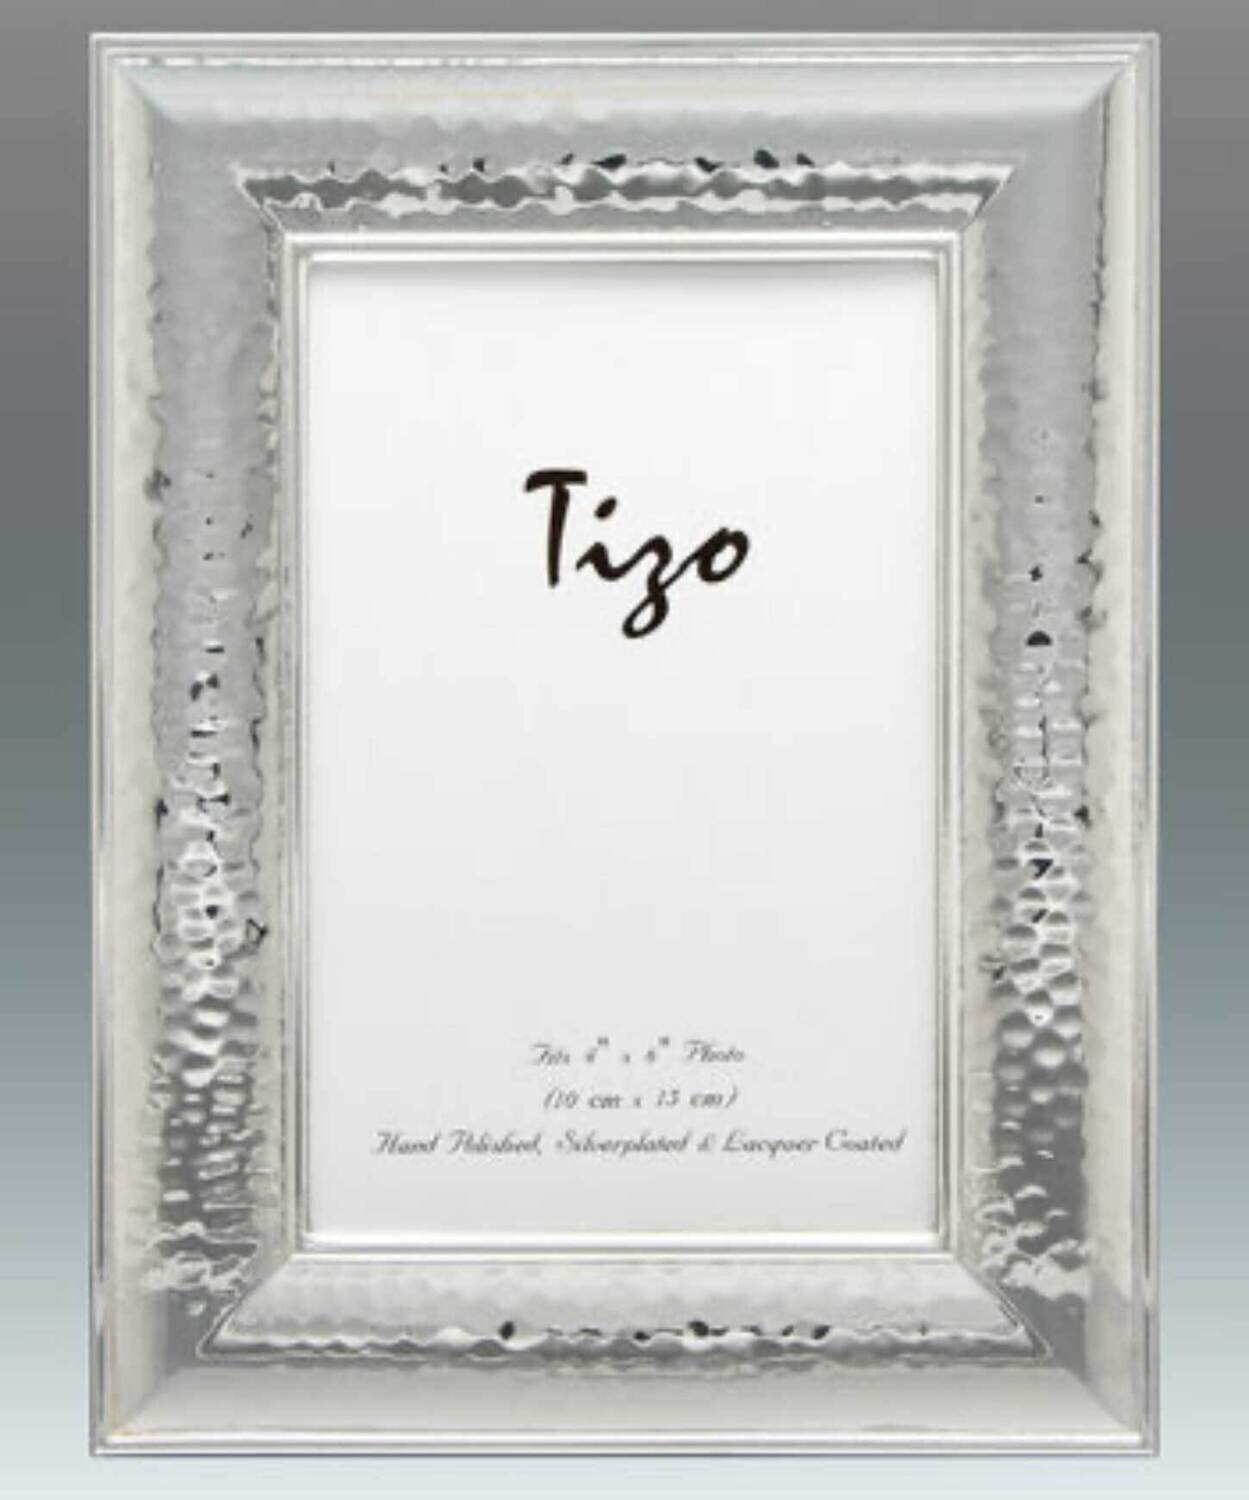 Tizo Wide Hammered Silver Plated Picture Frame 8 x 10 Inch 2029-80